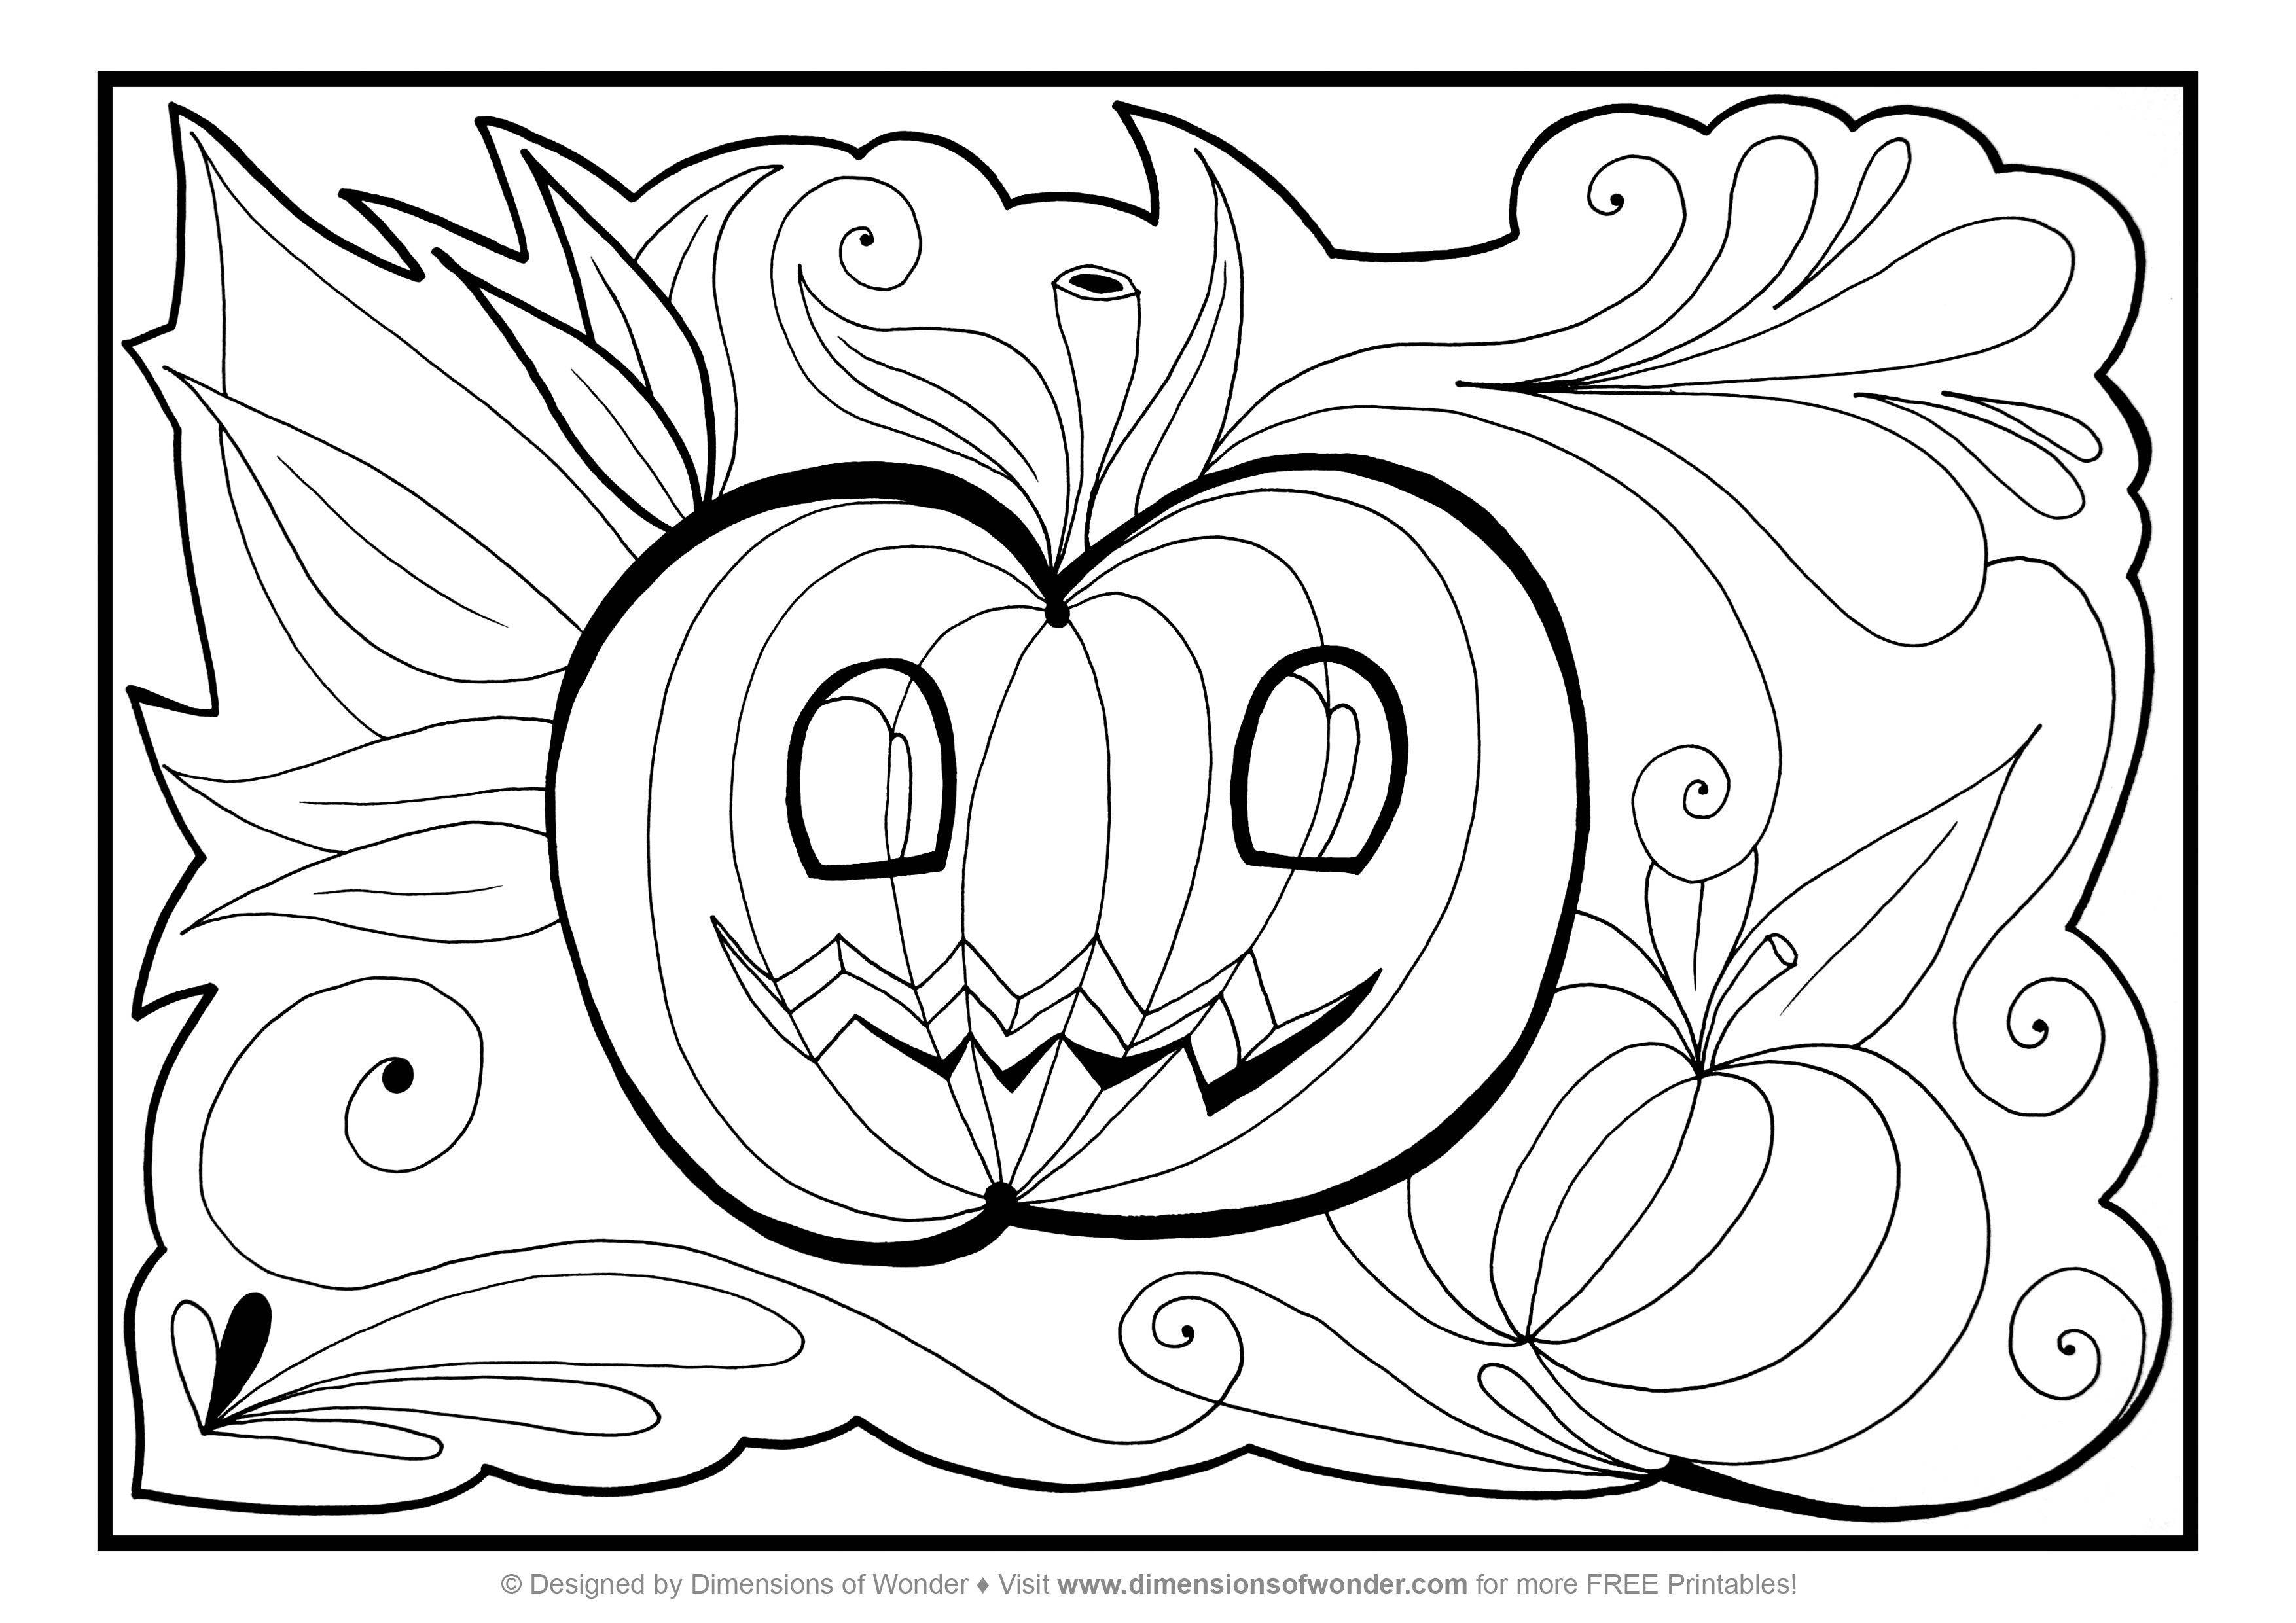 Halloween Coloring Pages Free Printable Scary Halloween Coloring ...